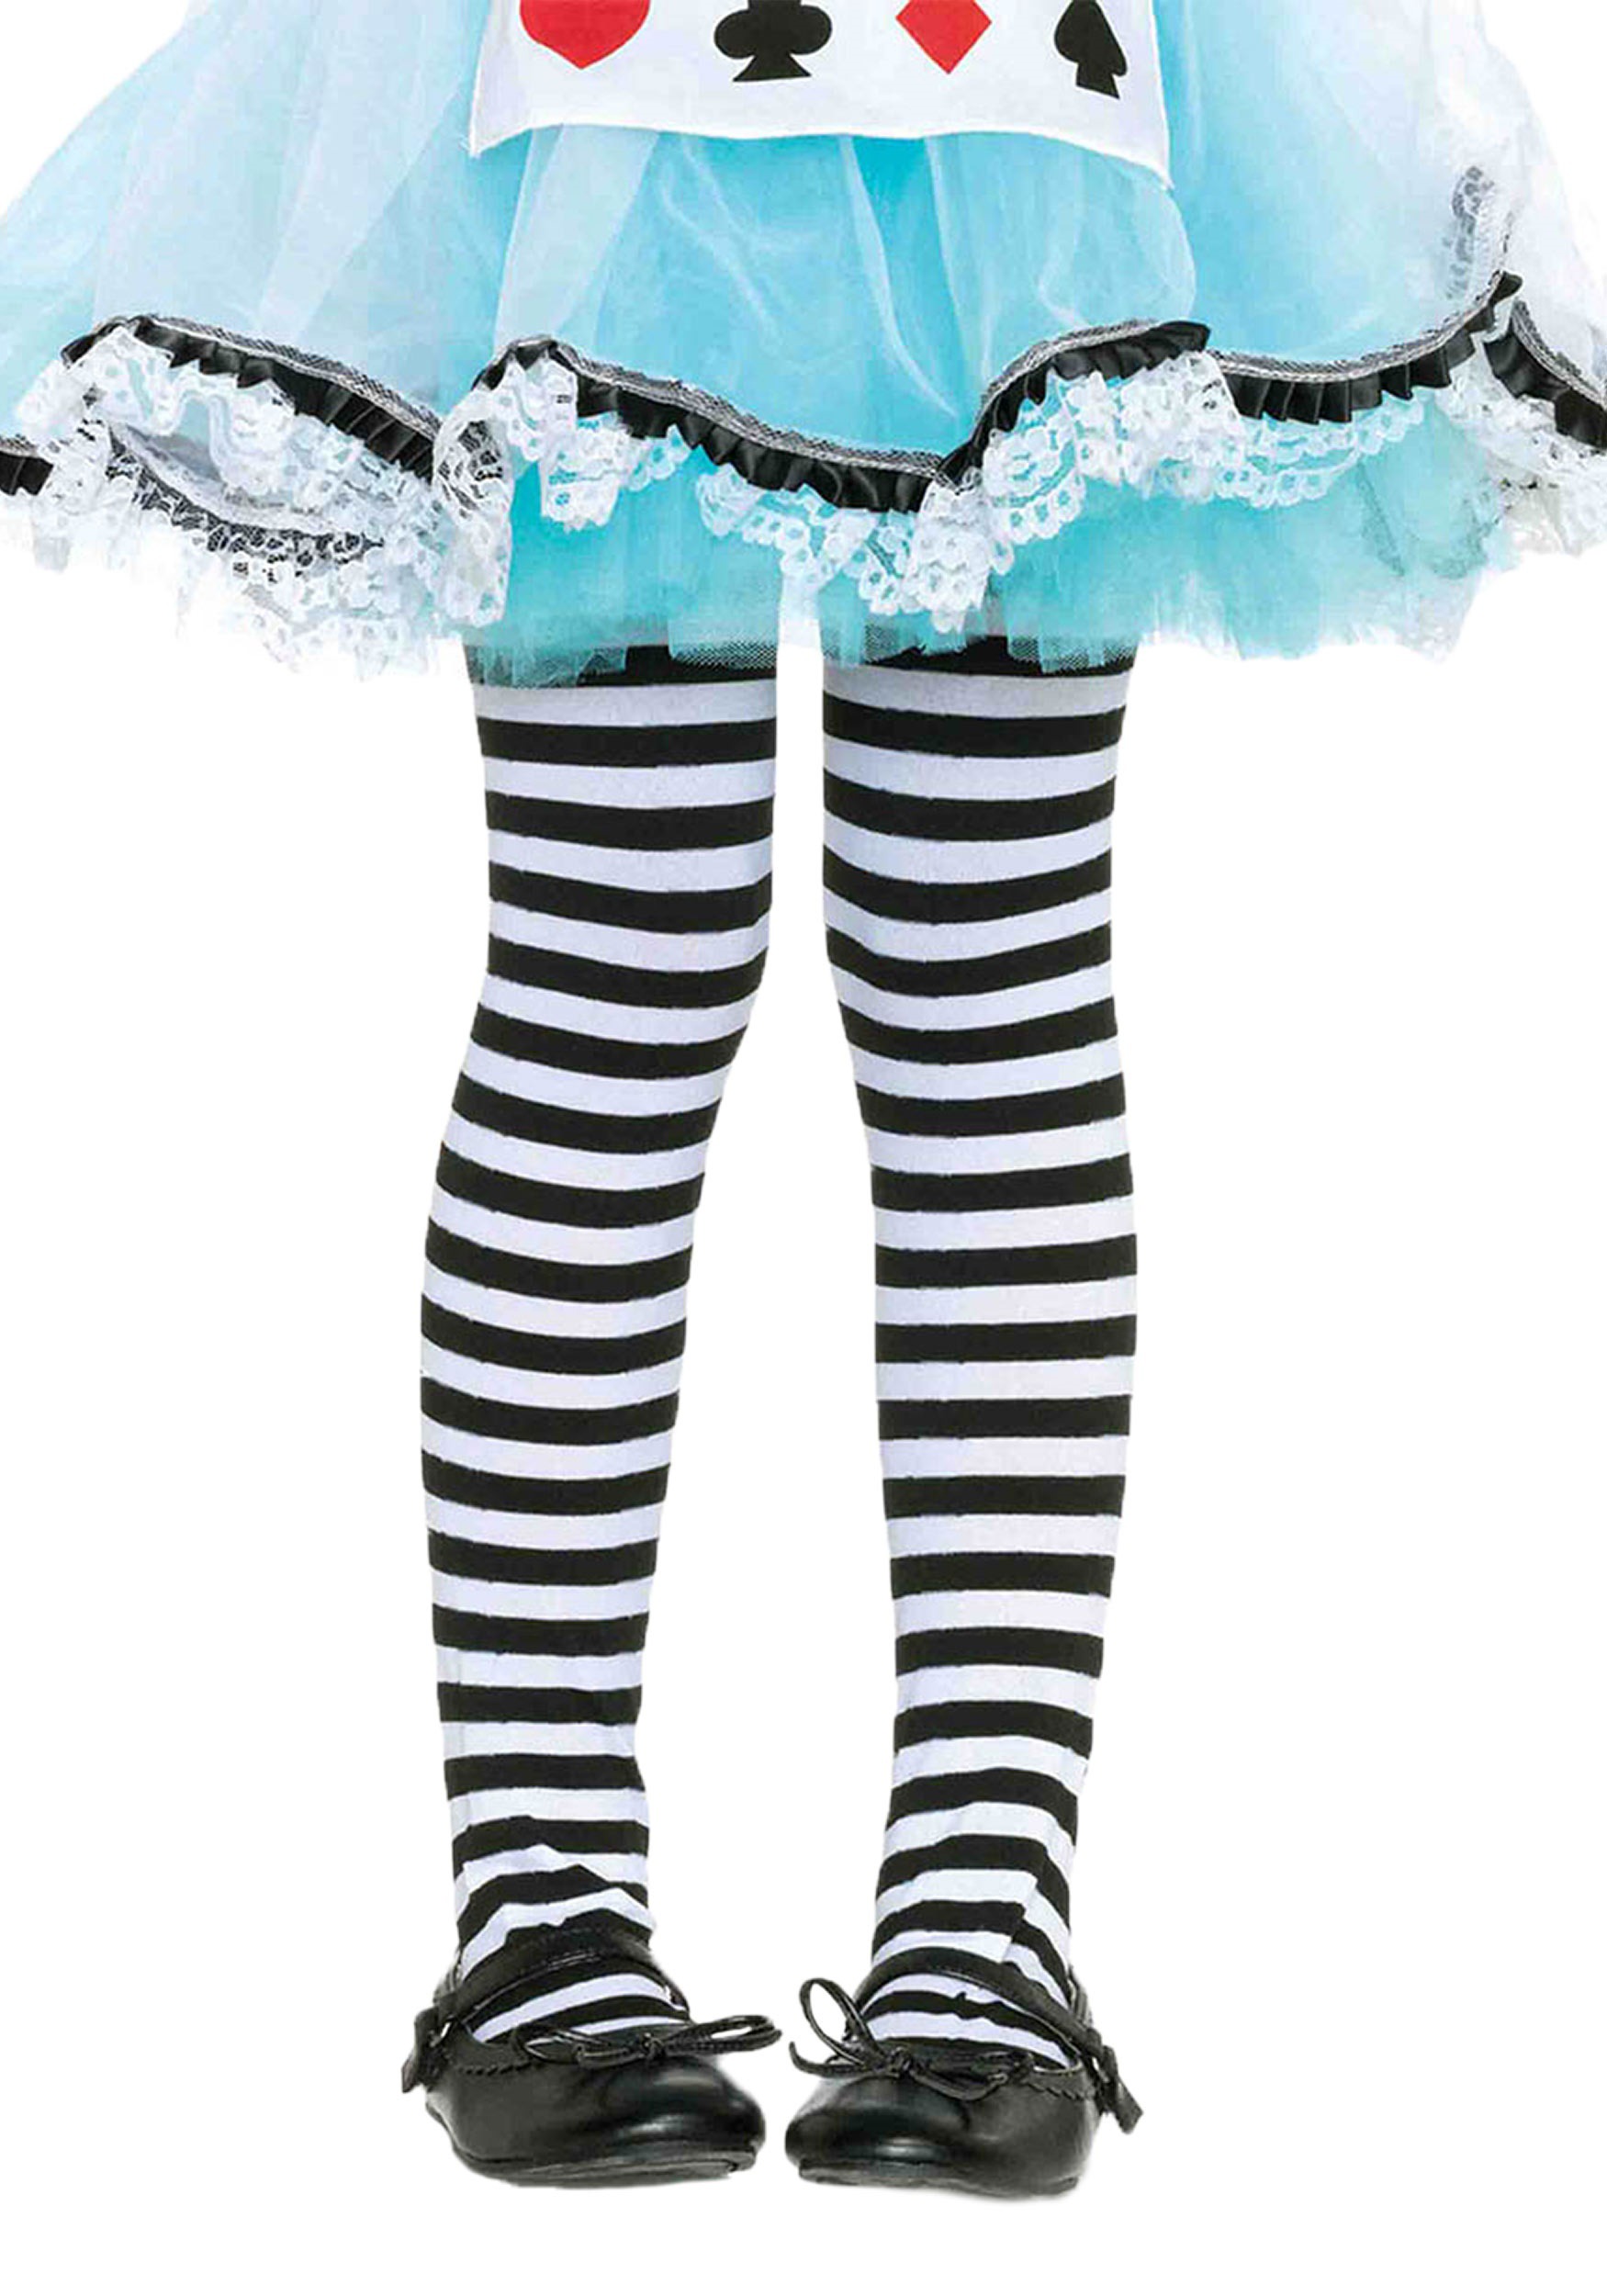 Witch Black and White Striped Stockings